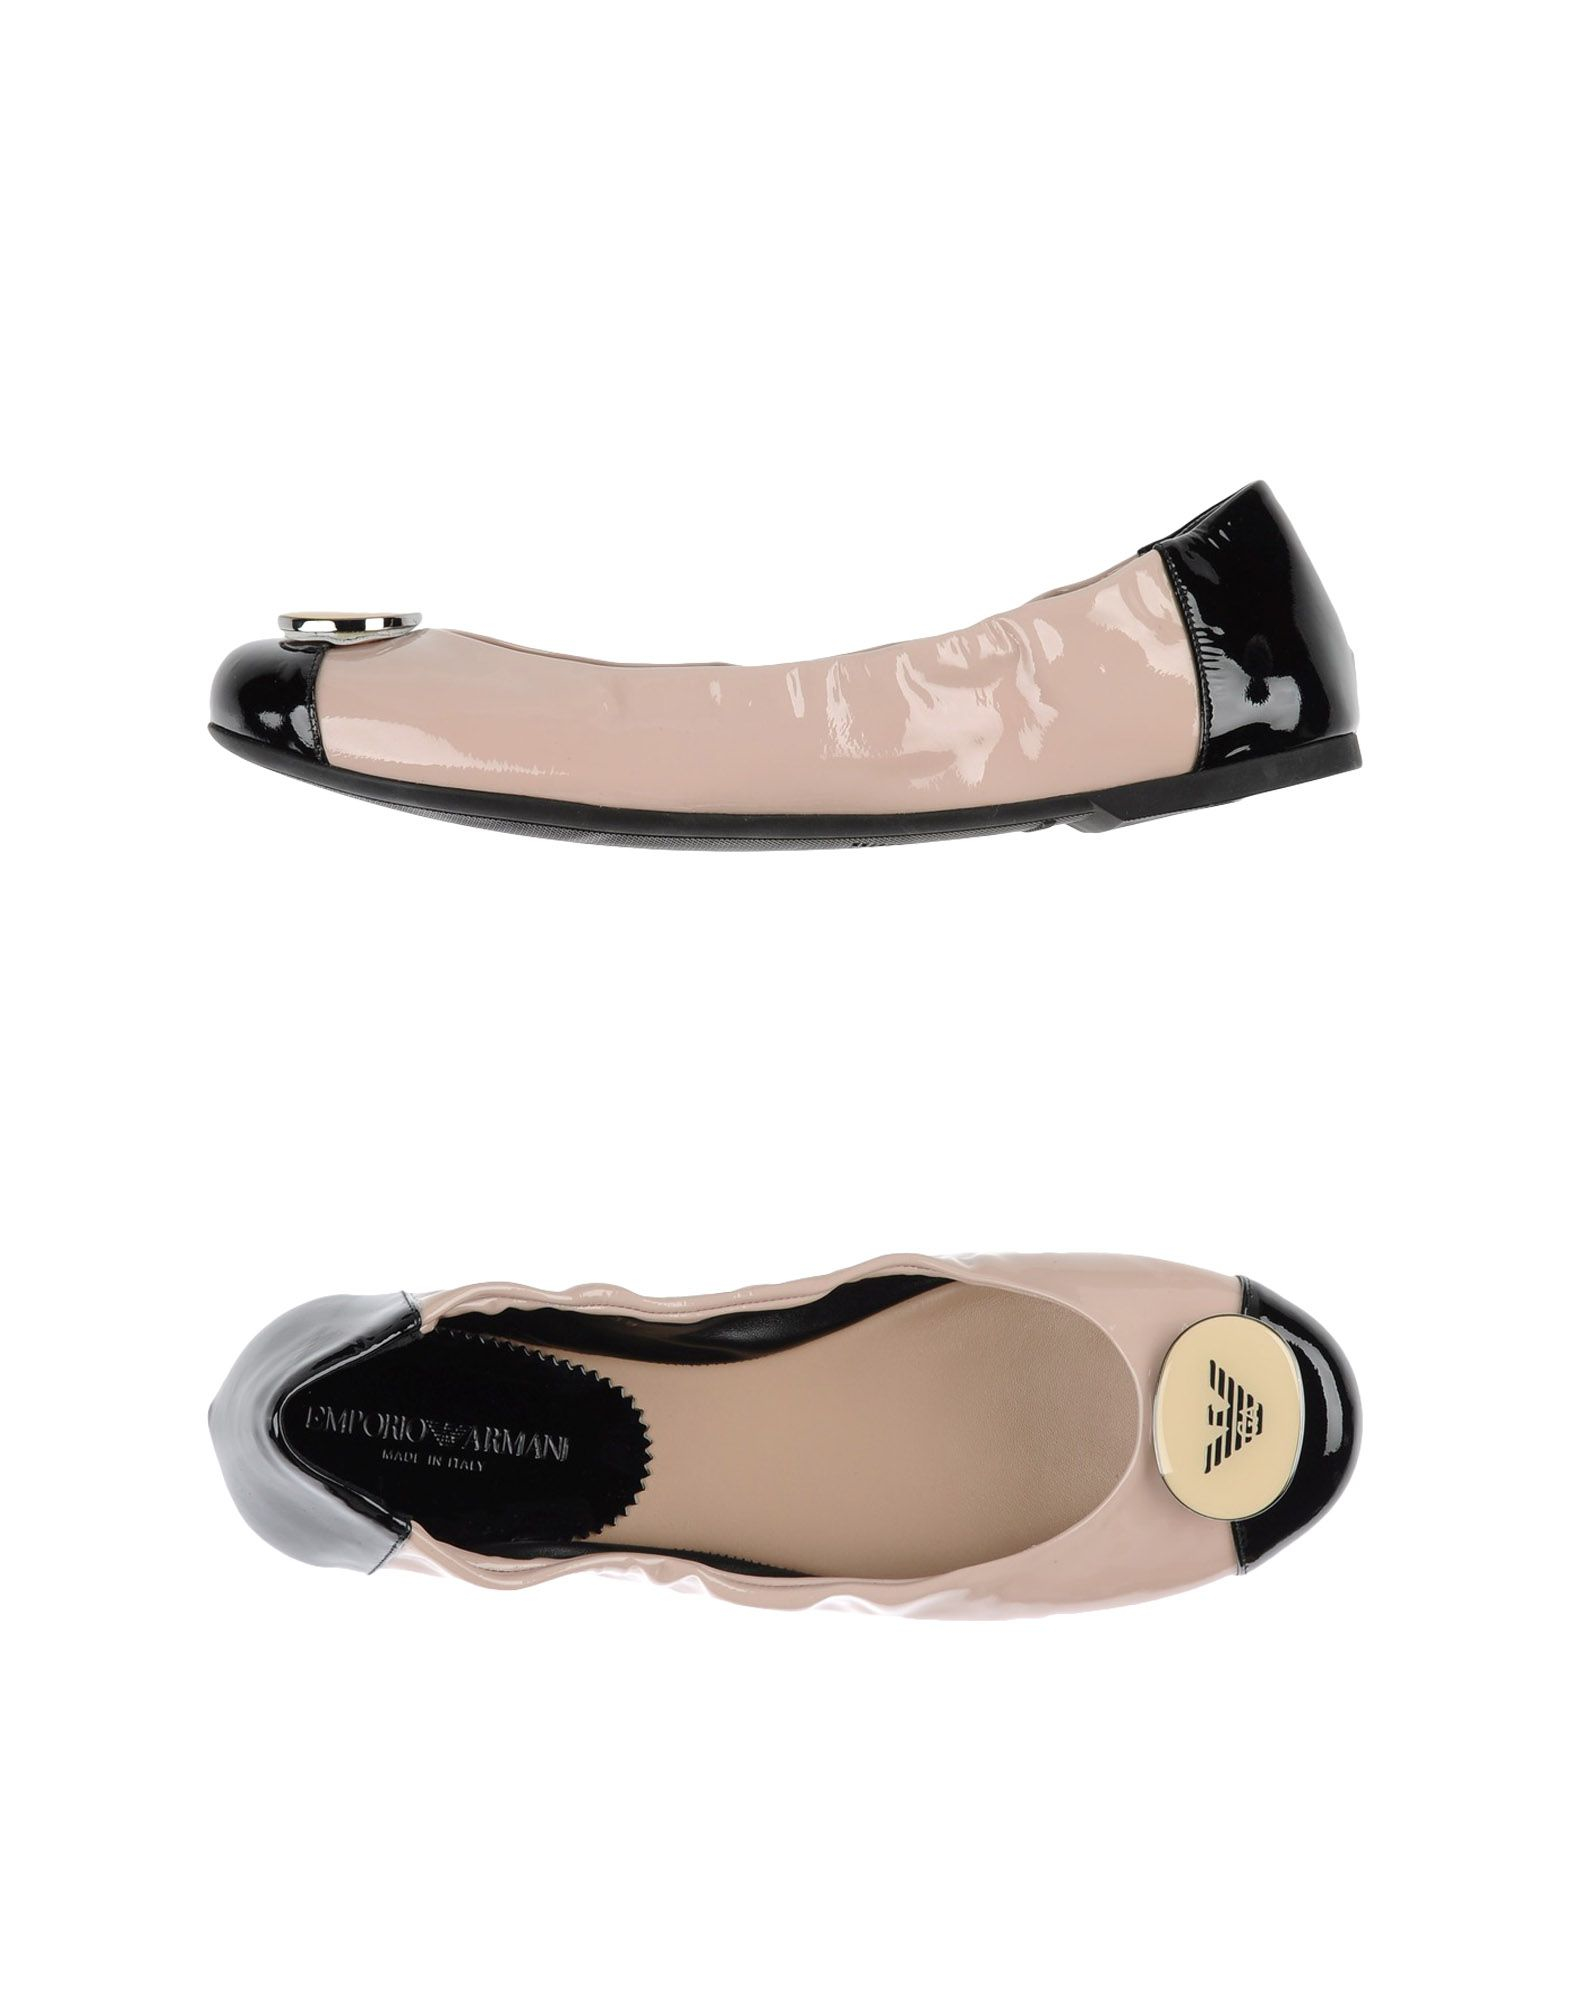 Emporio Armani Ballet Flats in Pink - Lyst